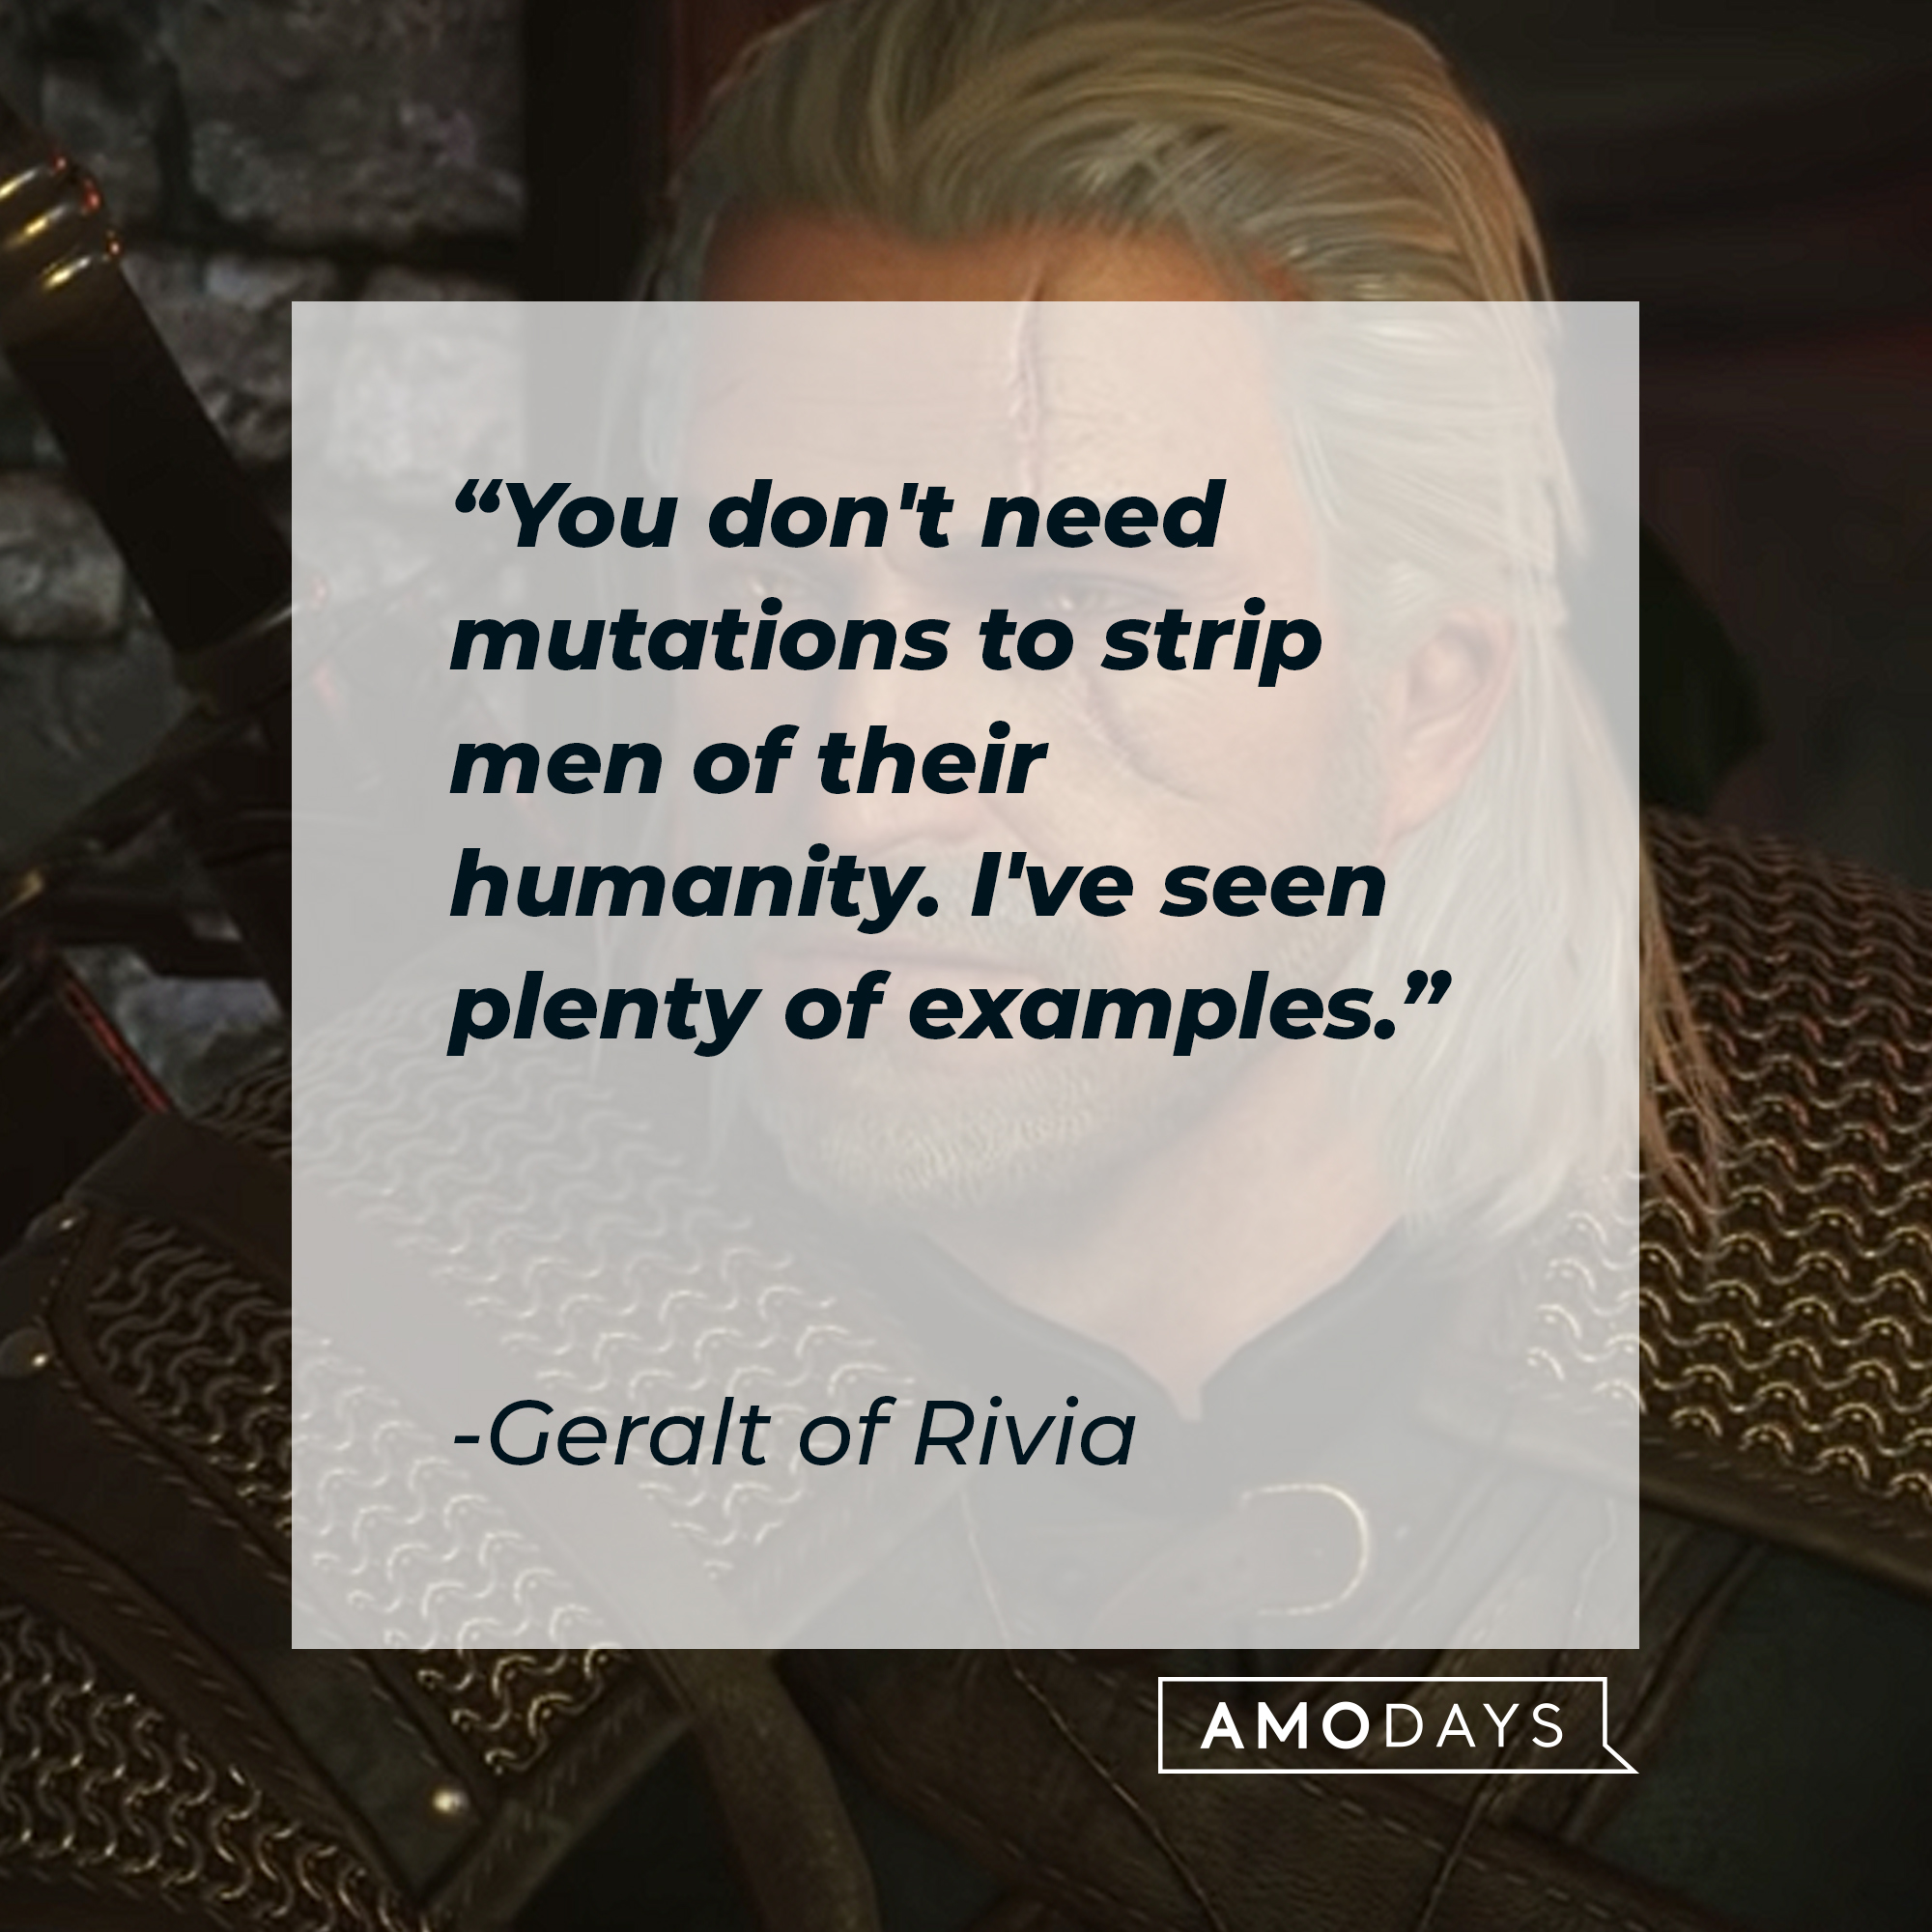 Geralt of Rivia from the video game with his quote: "You don't need mutations to strip men of their humanity. I've seen plenty of examples." | Source: youtube.com/thewitcher